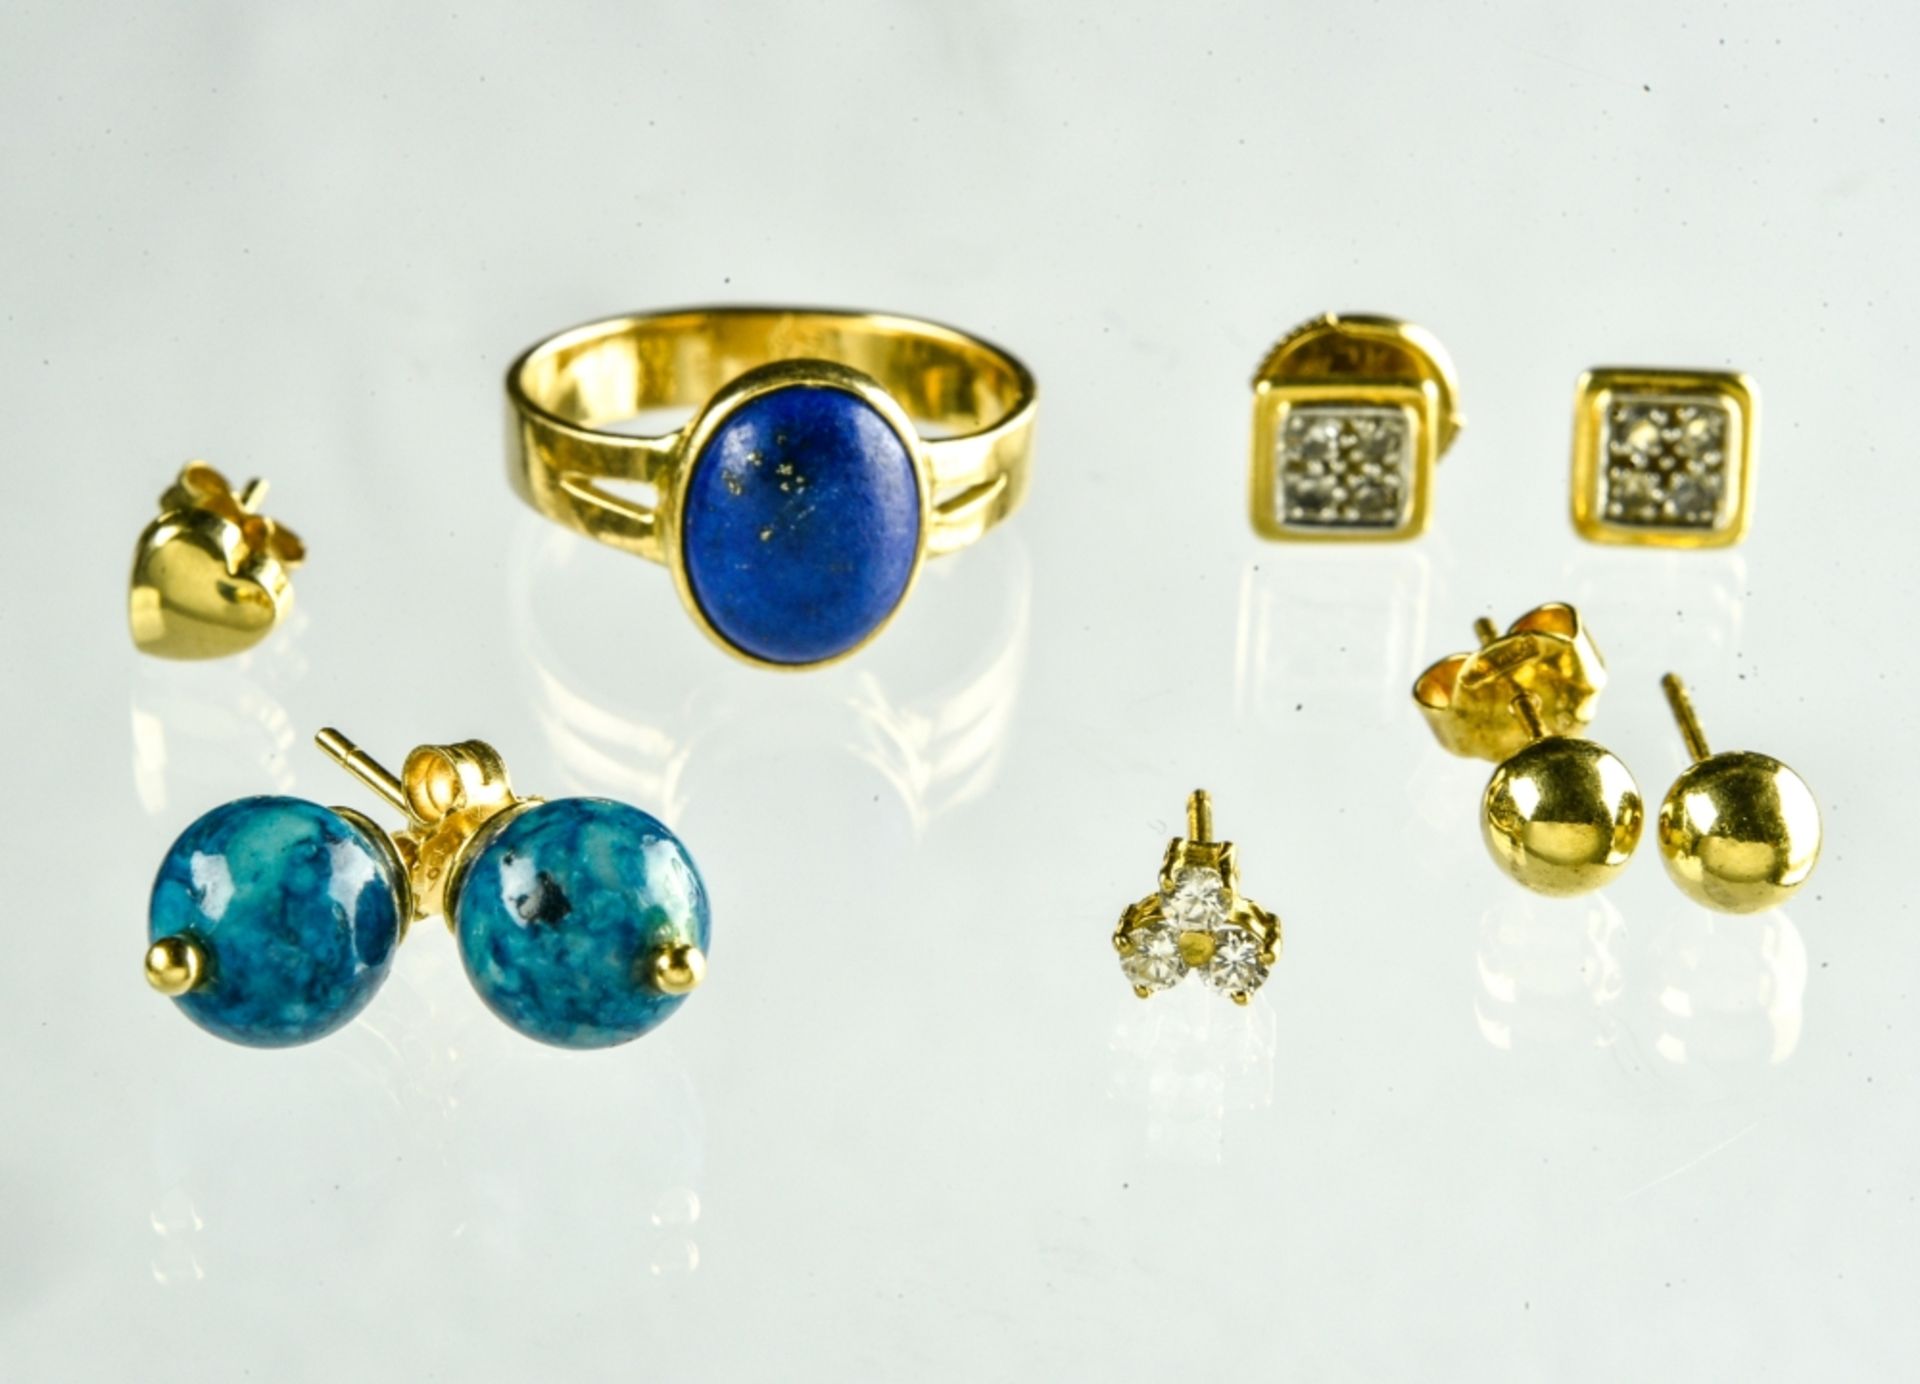 Lot of stud earrings 18 kt yellow gold, including 3 pairs (missing two backs) and two mismatched. An